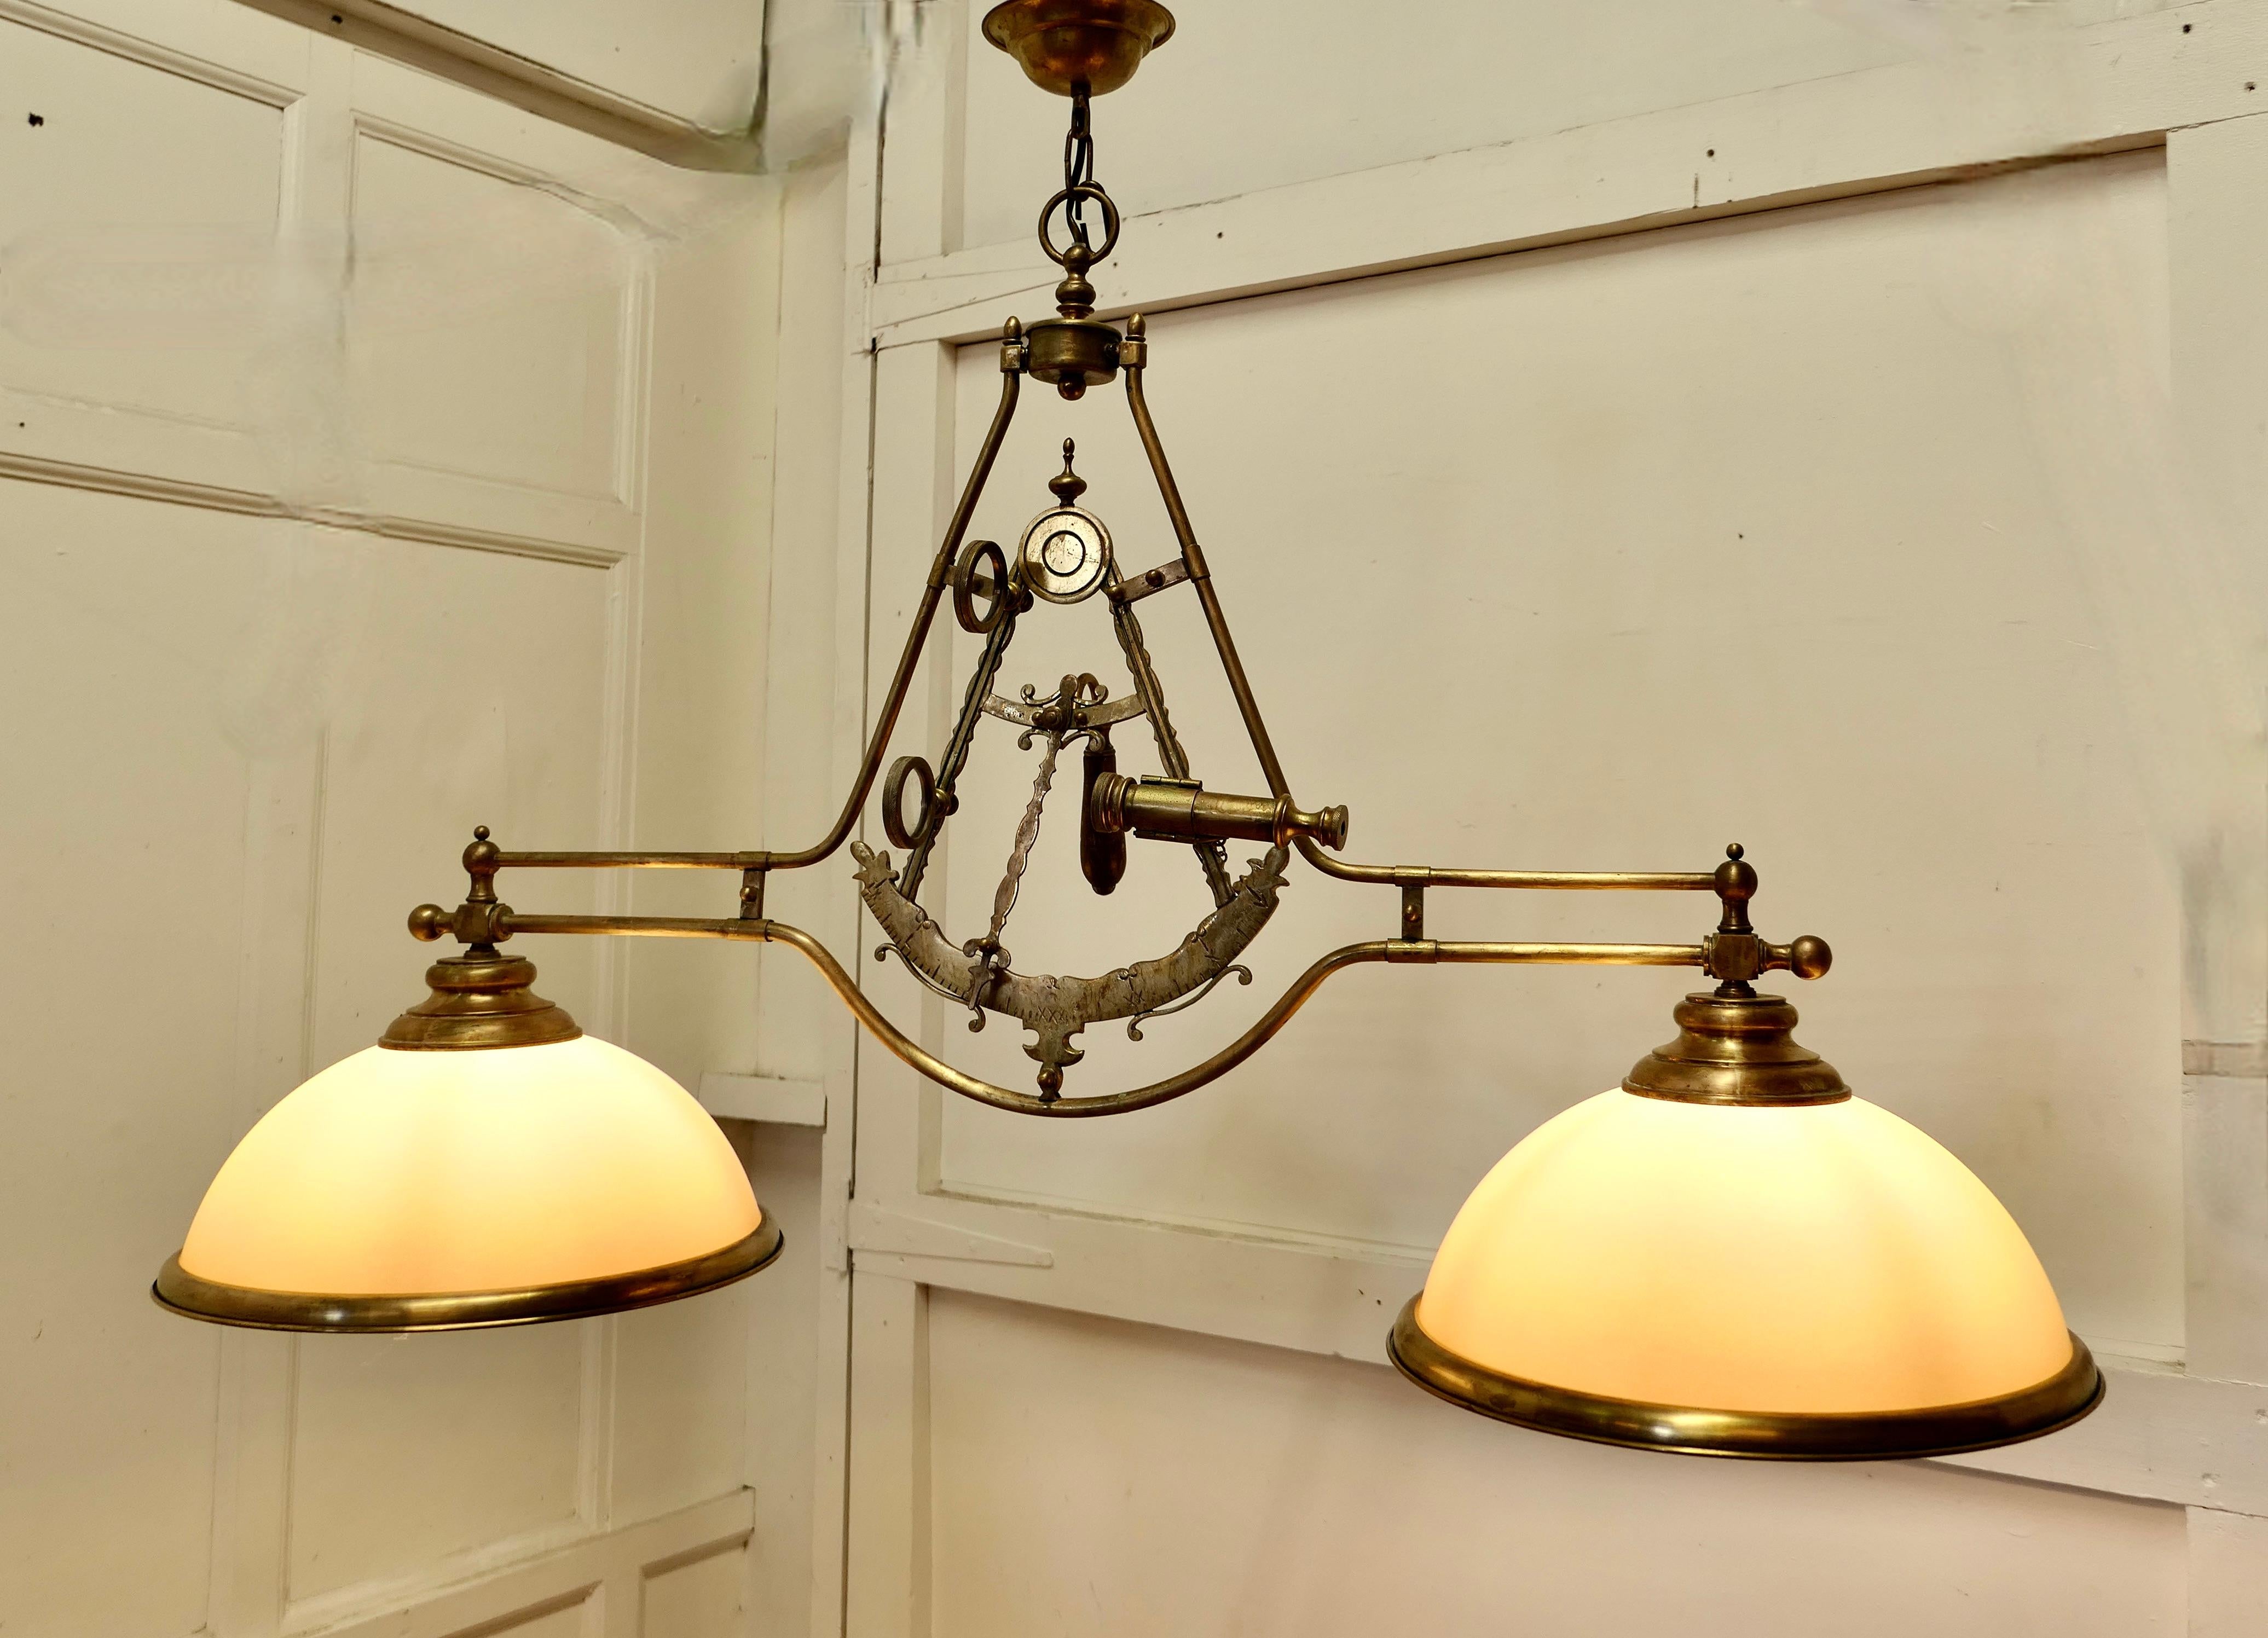 Superb large brass sextant ceiling light from the captains cabin

A very good quality lamp it has been made in the form of a brass sextant, it is centrally hung with a large shade at each end (like a snooker table light)
The lamps each have a